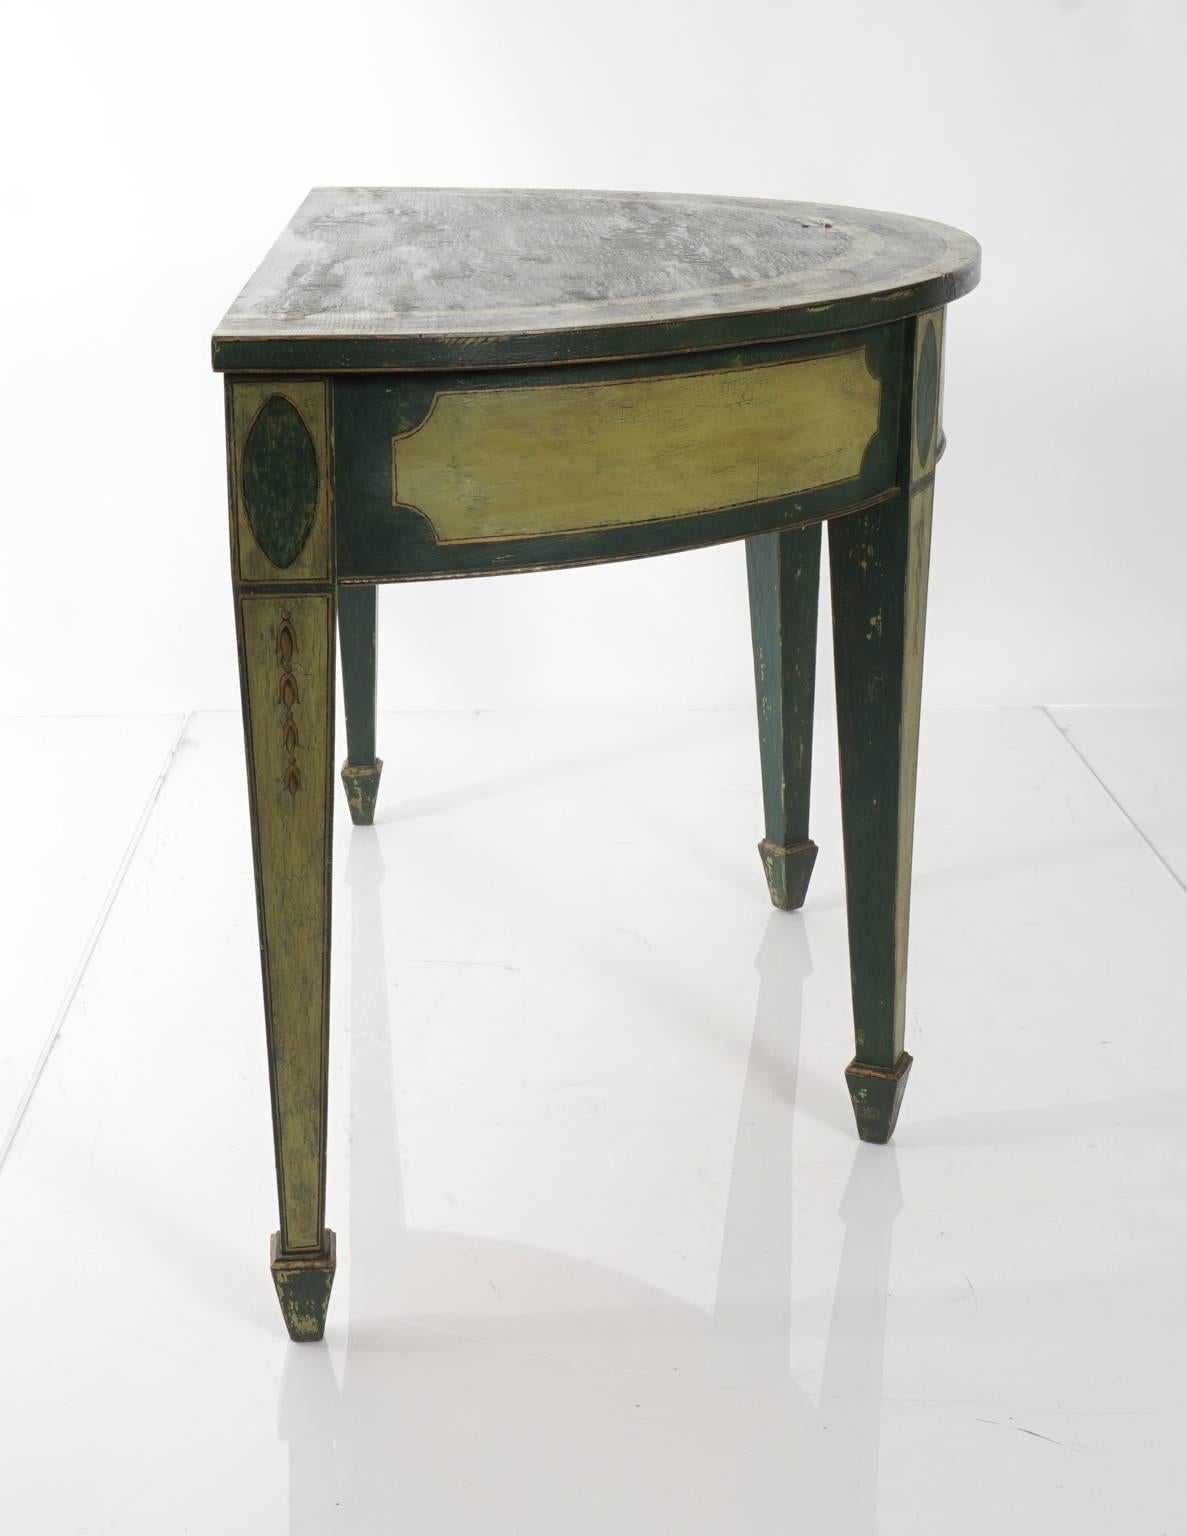 Early 20th century, Adam's style demilune table. Painted green.